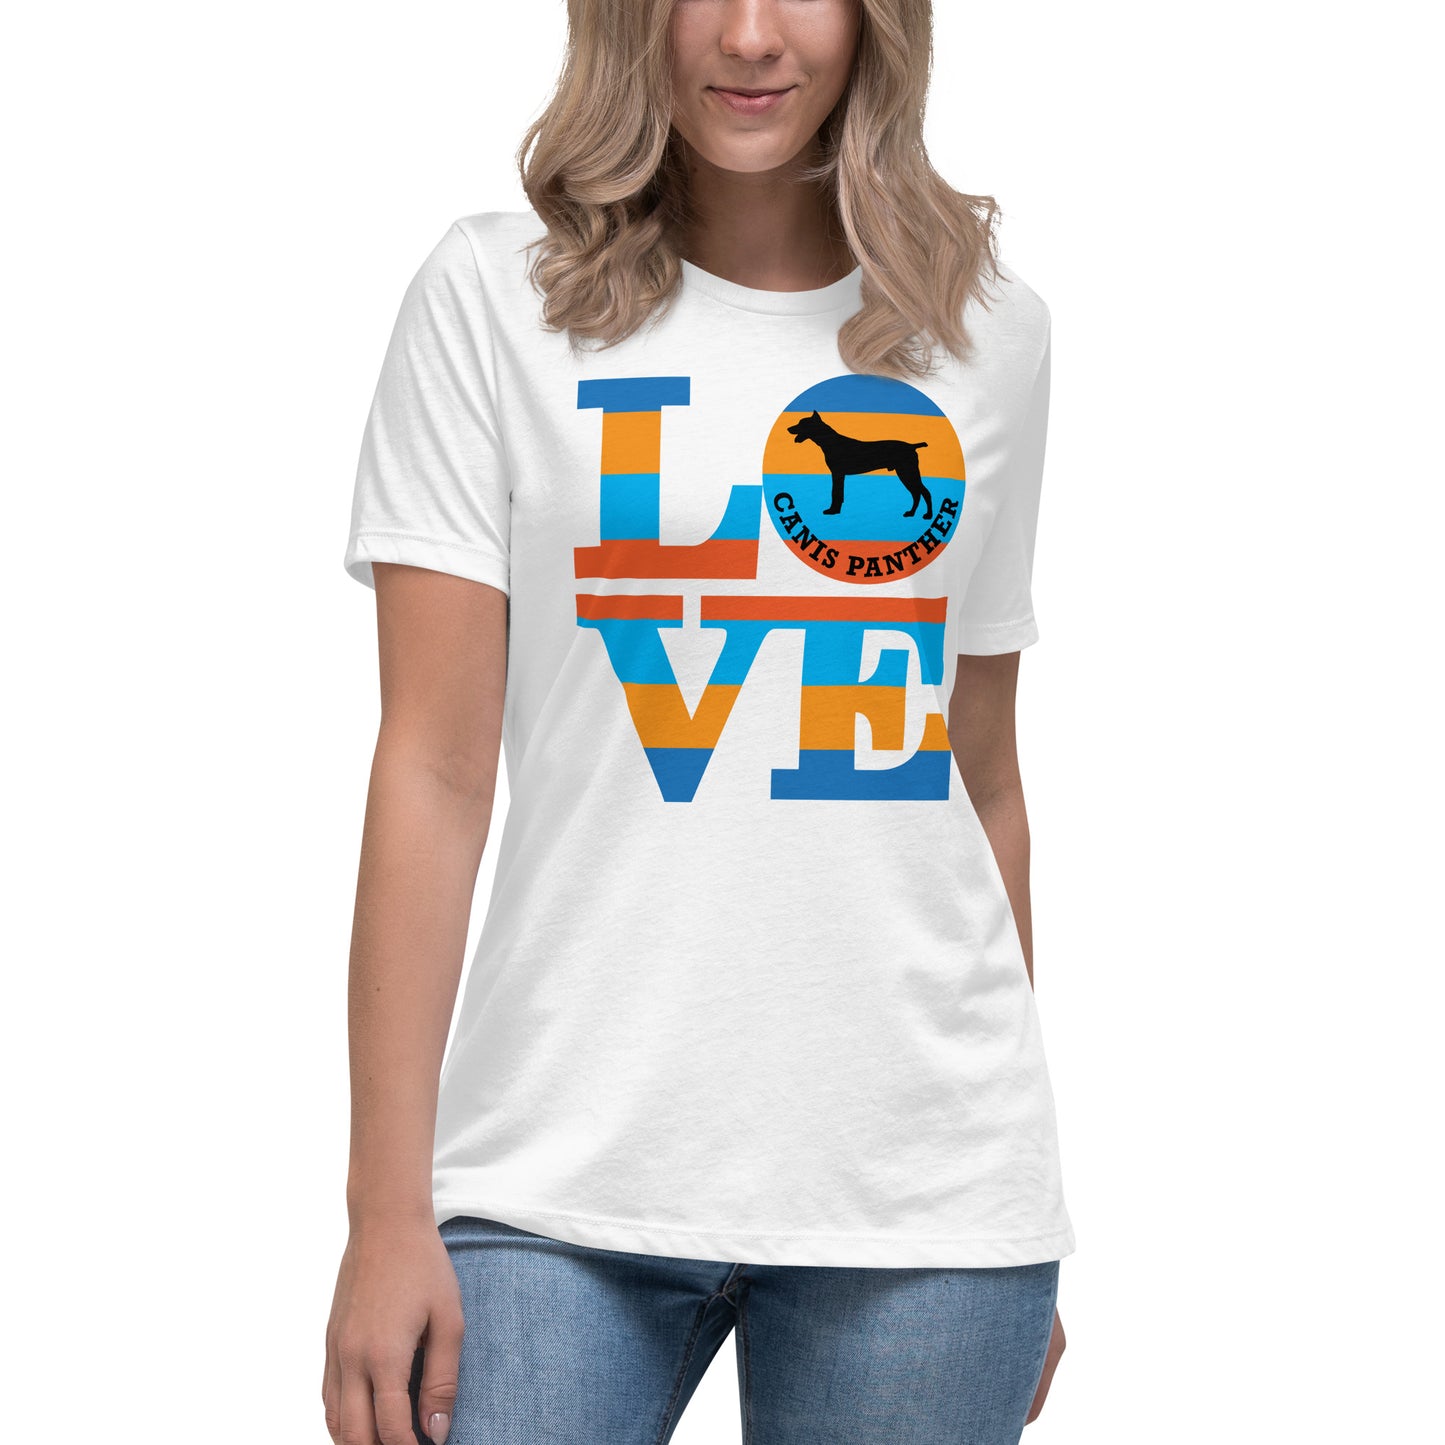 Love Canis Panther Women's Relaxed T-Shirt